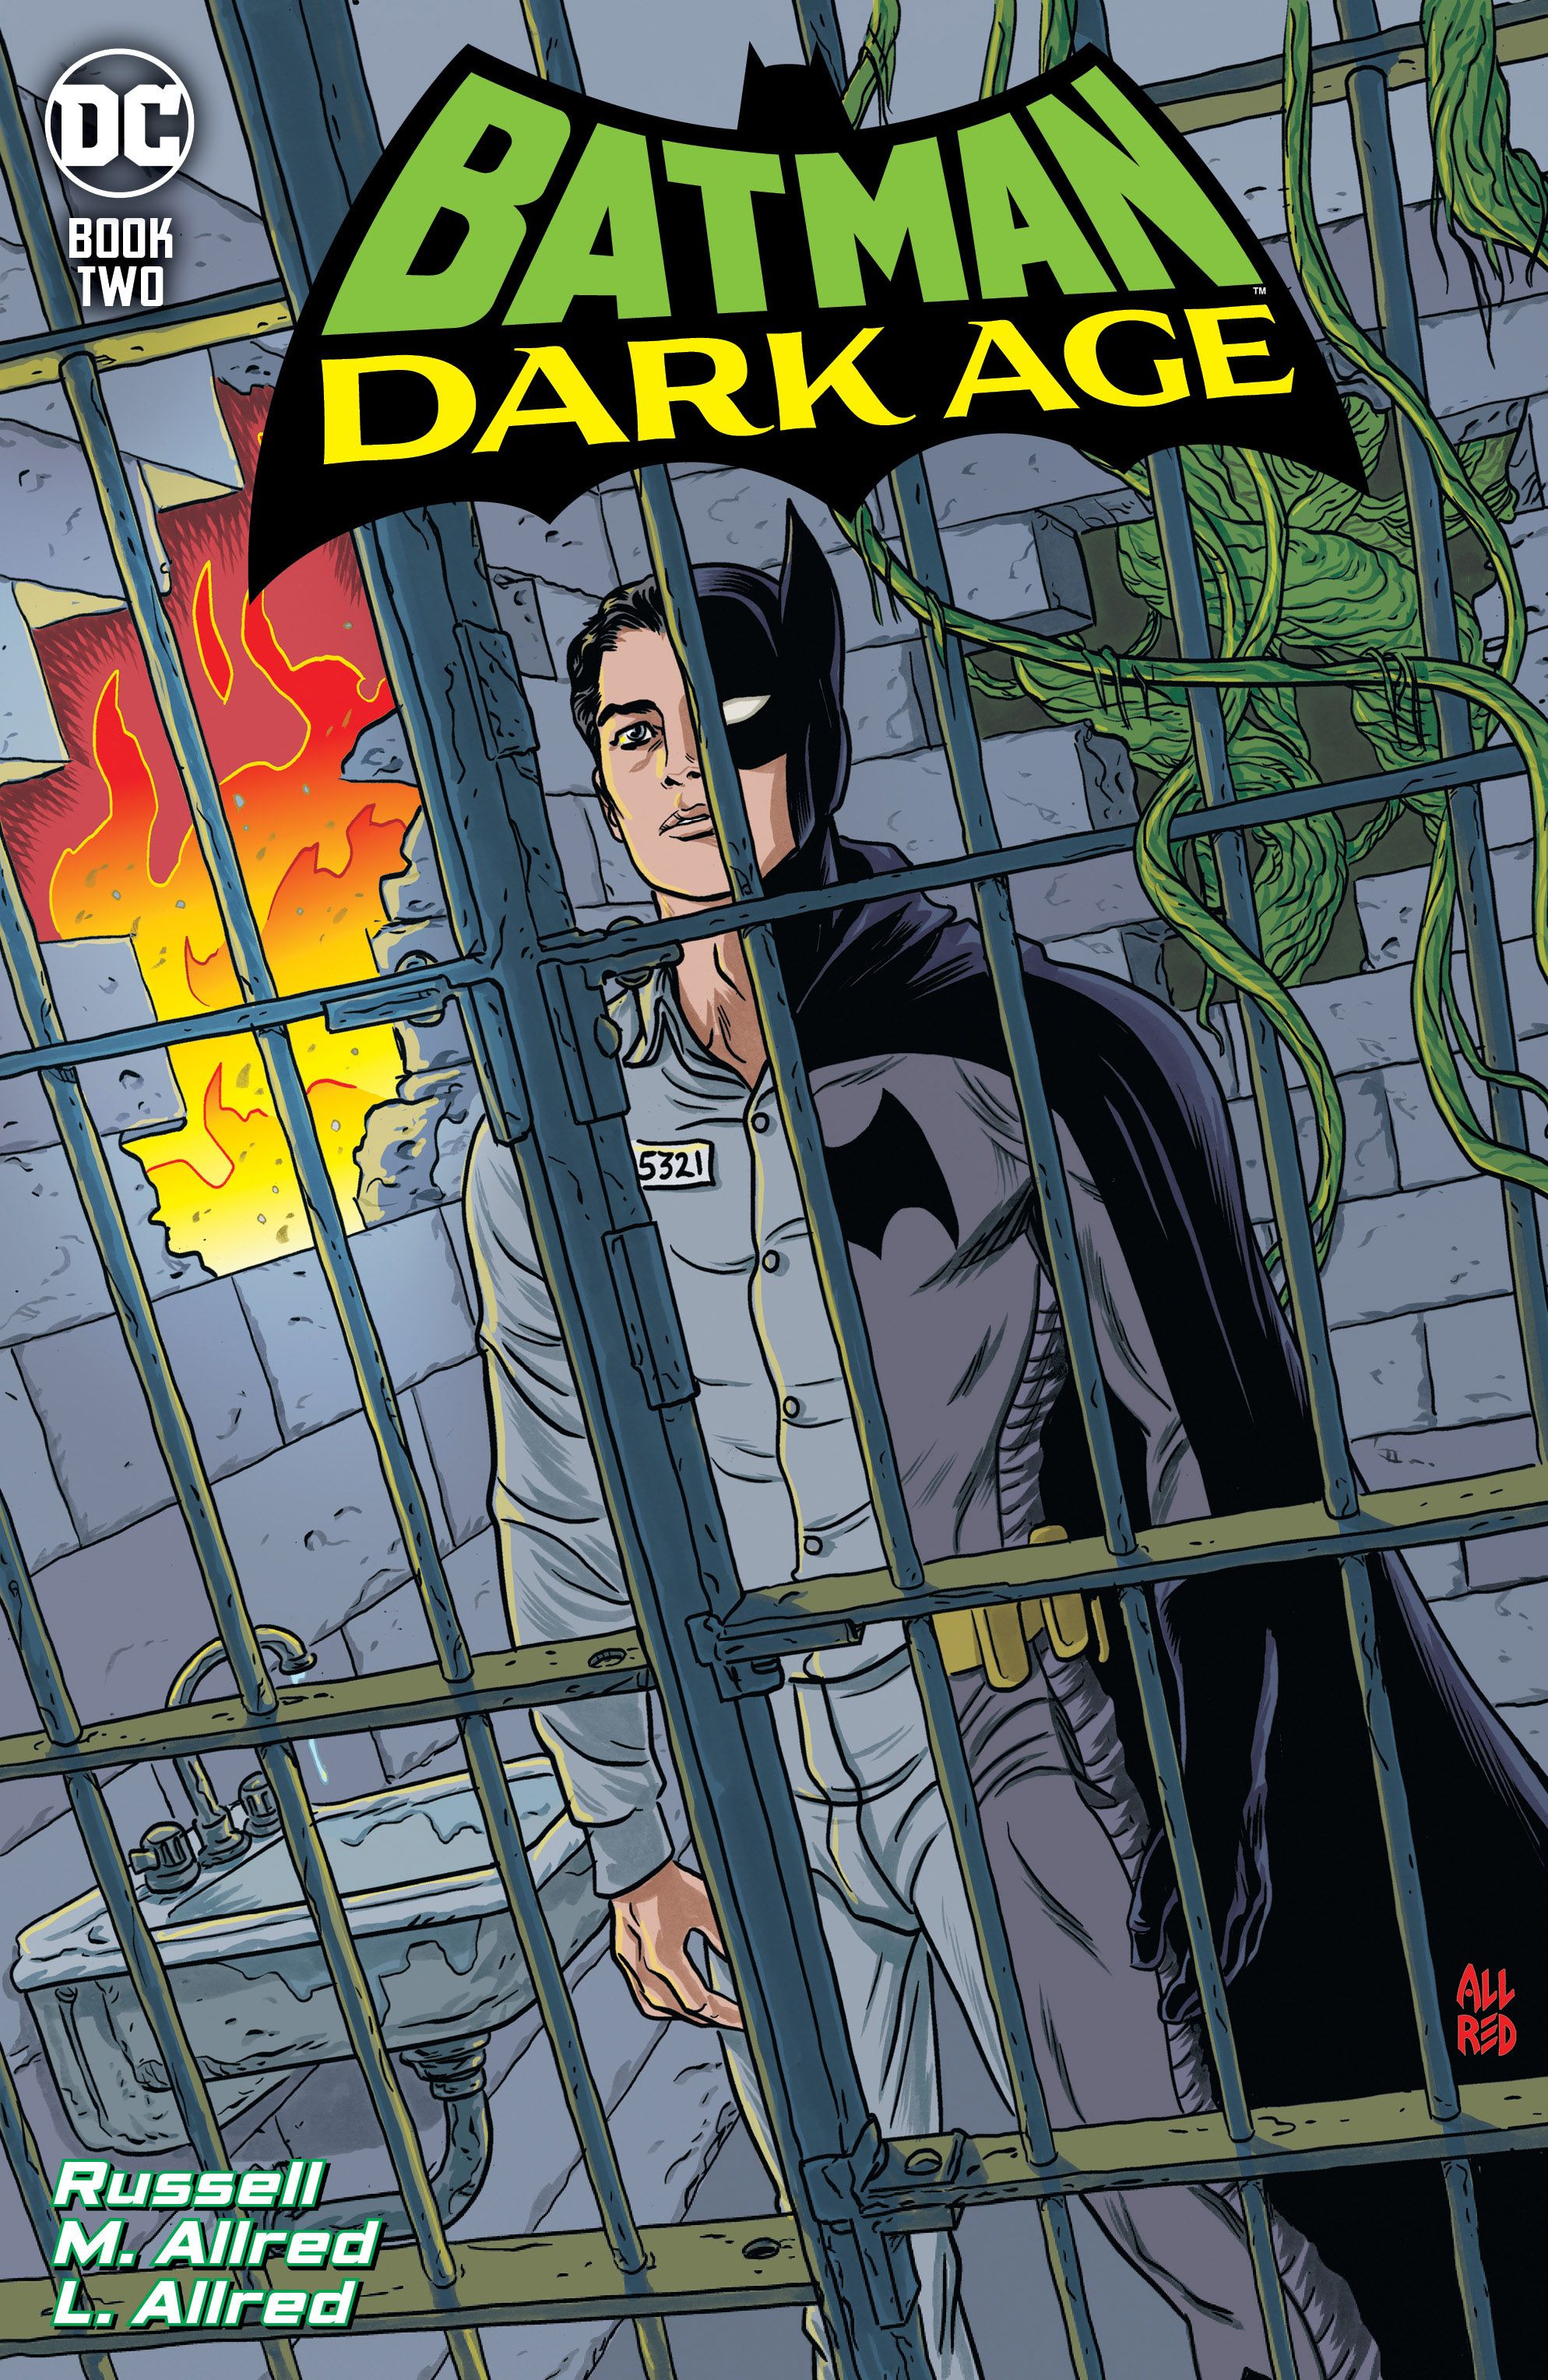 Bruce Wayne standing in a jail cell wearing half a prison jumper and half of a batsuit.